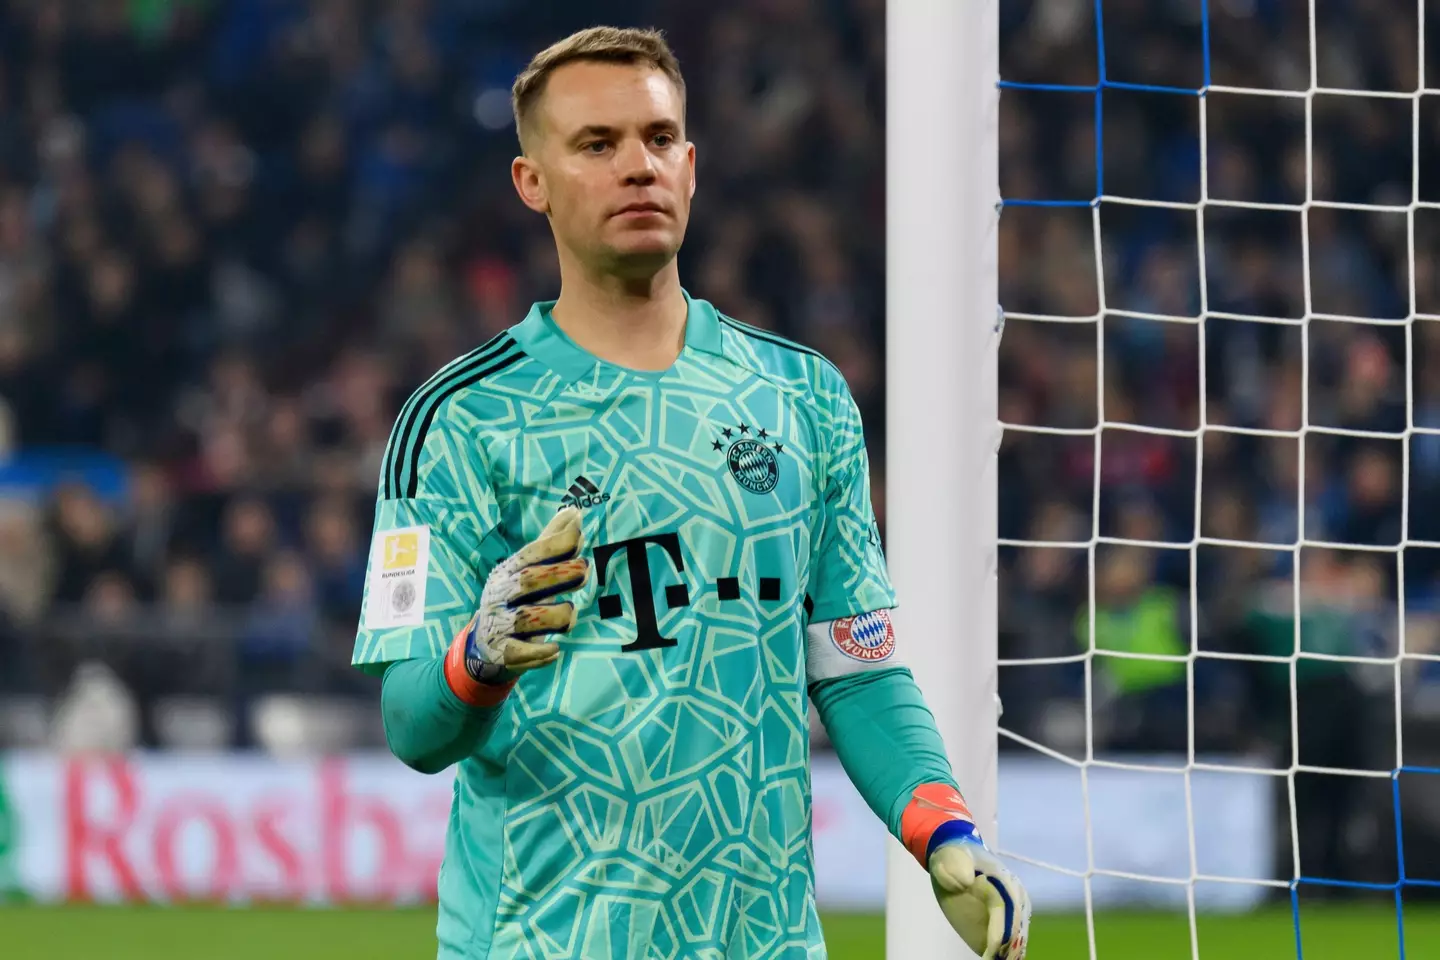 Neuer may have got his wallet back, but he also probably lost a fan. Image: Alamy